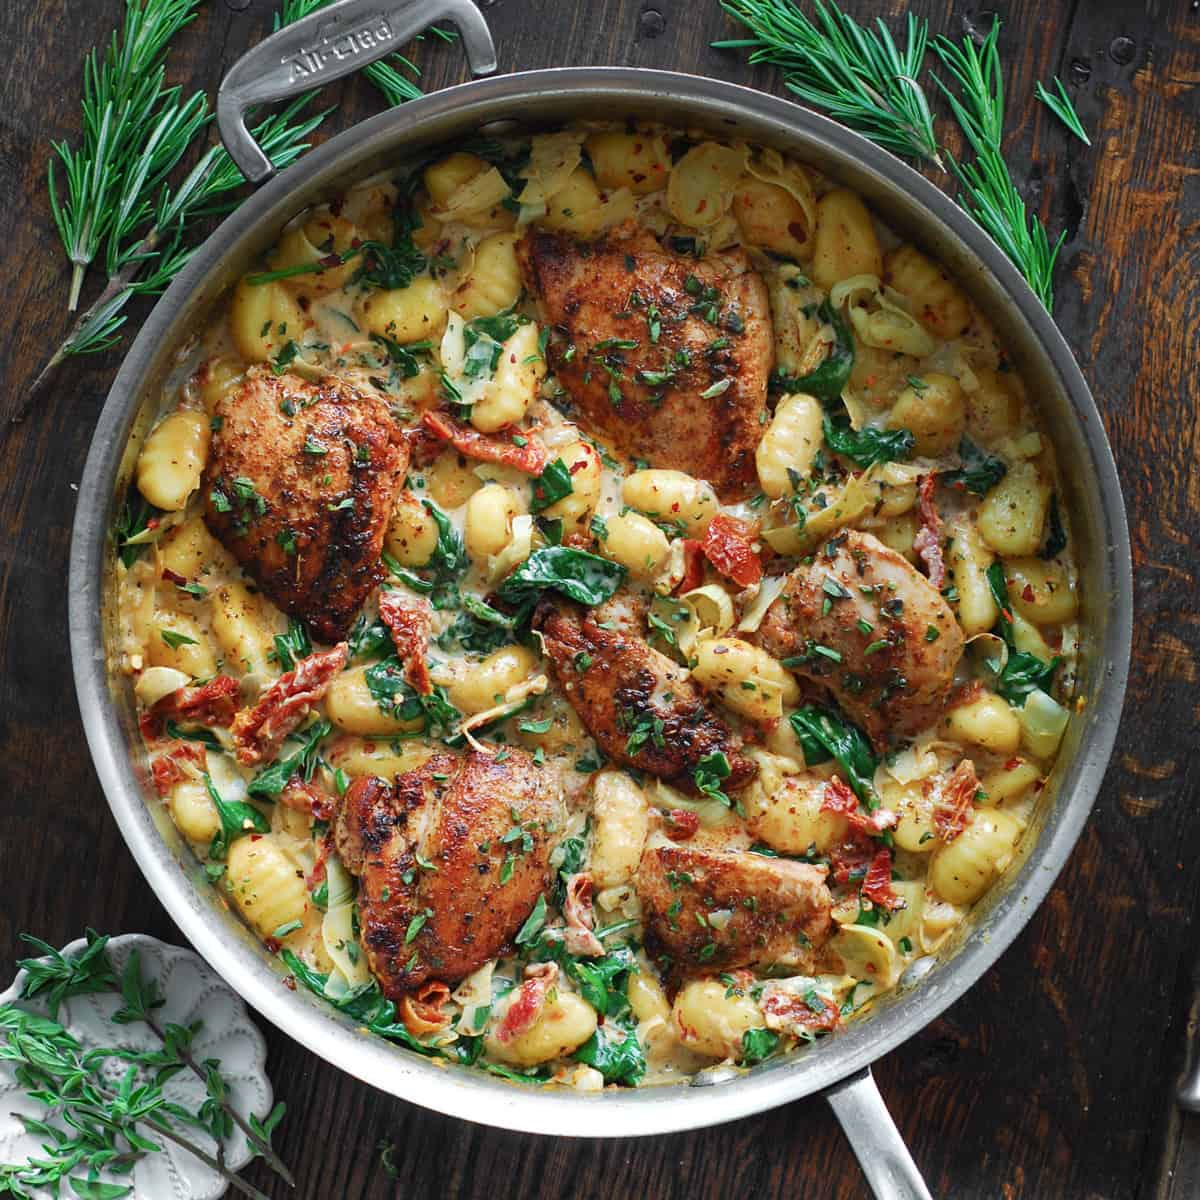 Creamy Chicken and Gnocchi with Sun-Dried Tomatoes, Spinach, and Artichokes - in a stainless steel pan.